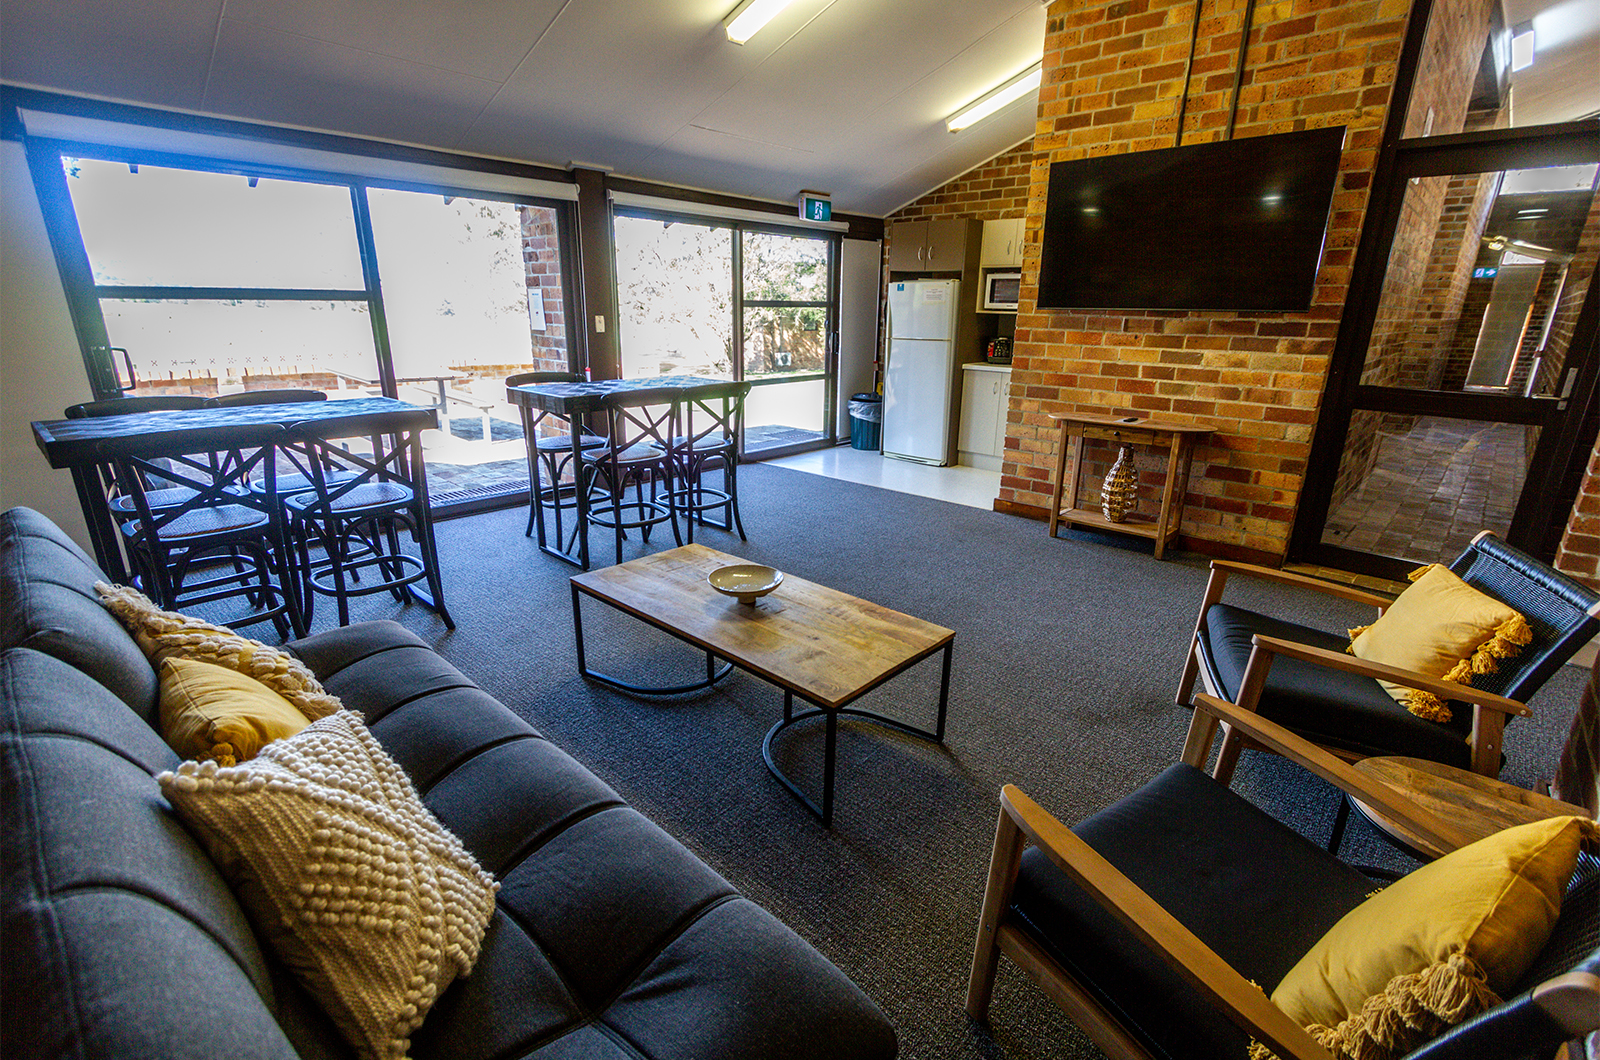 Tocal Glendarra common room with TV, couch, chairs and tables.